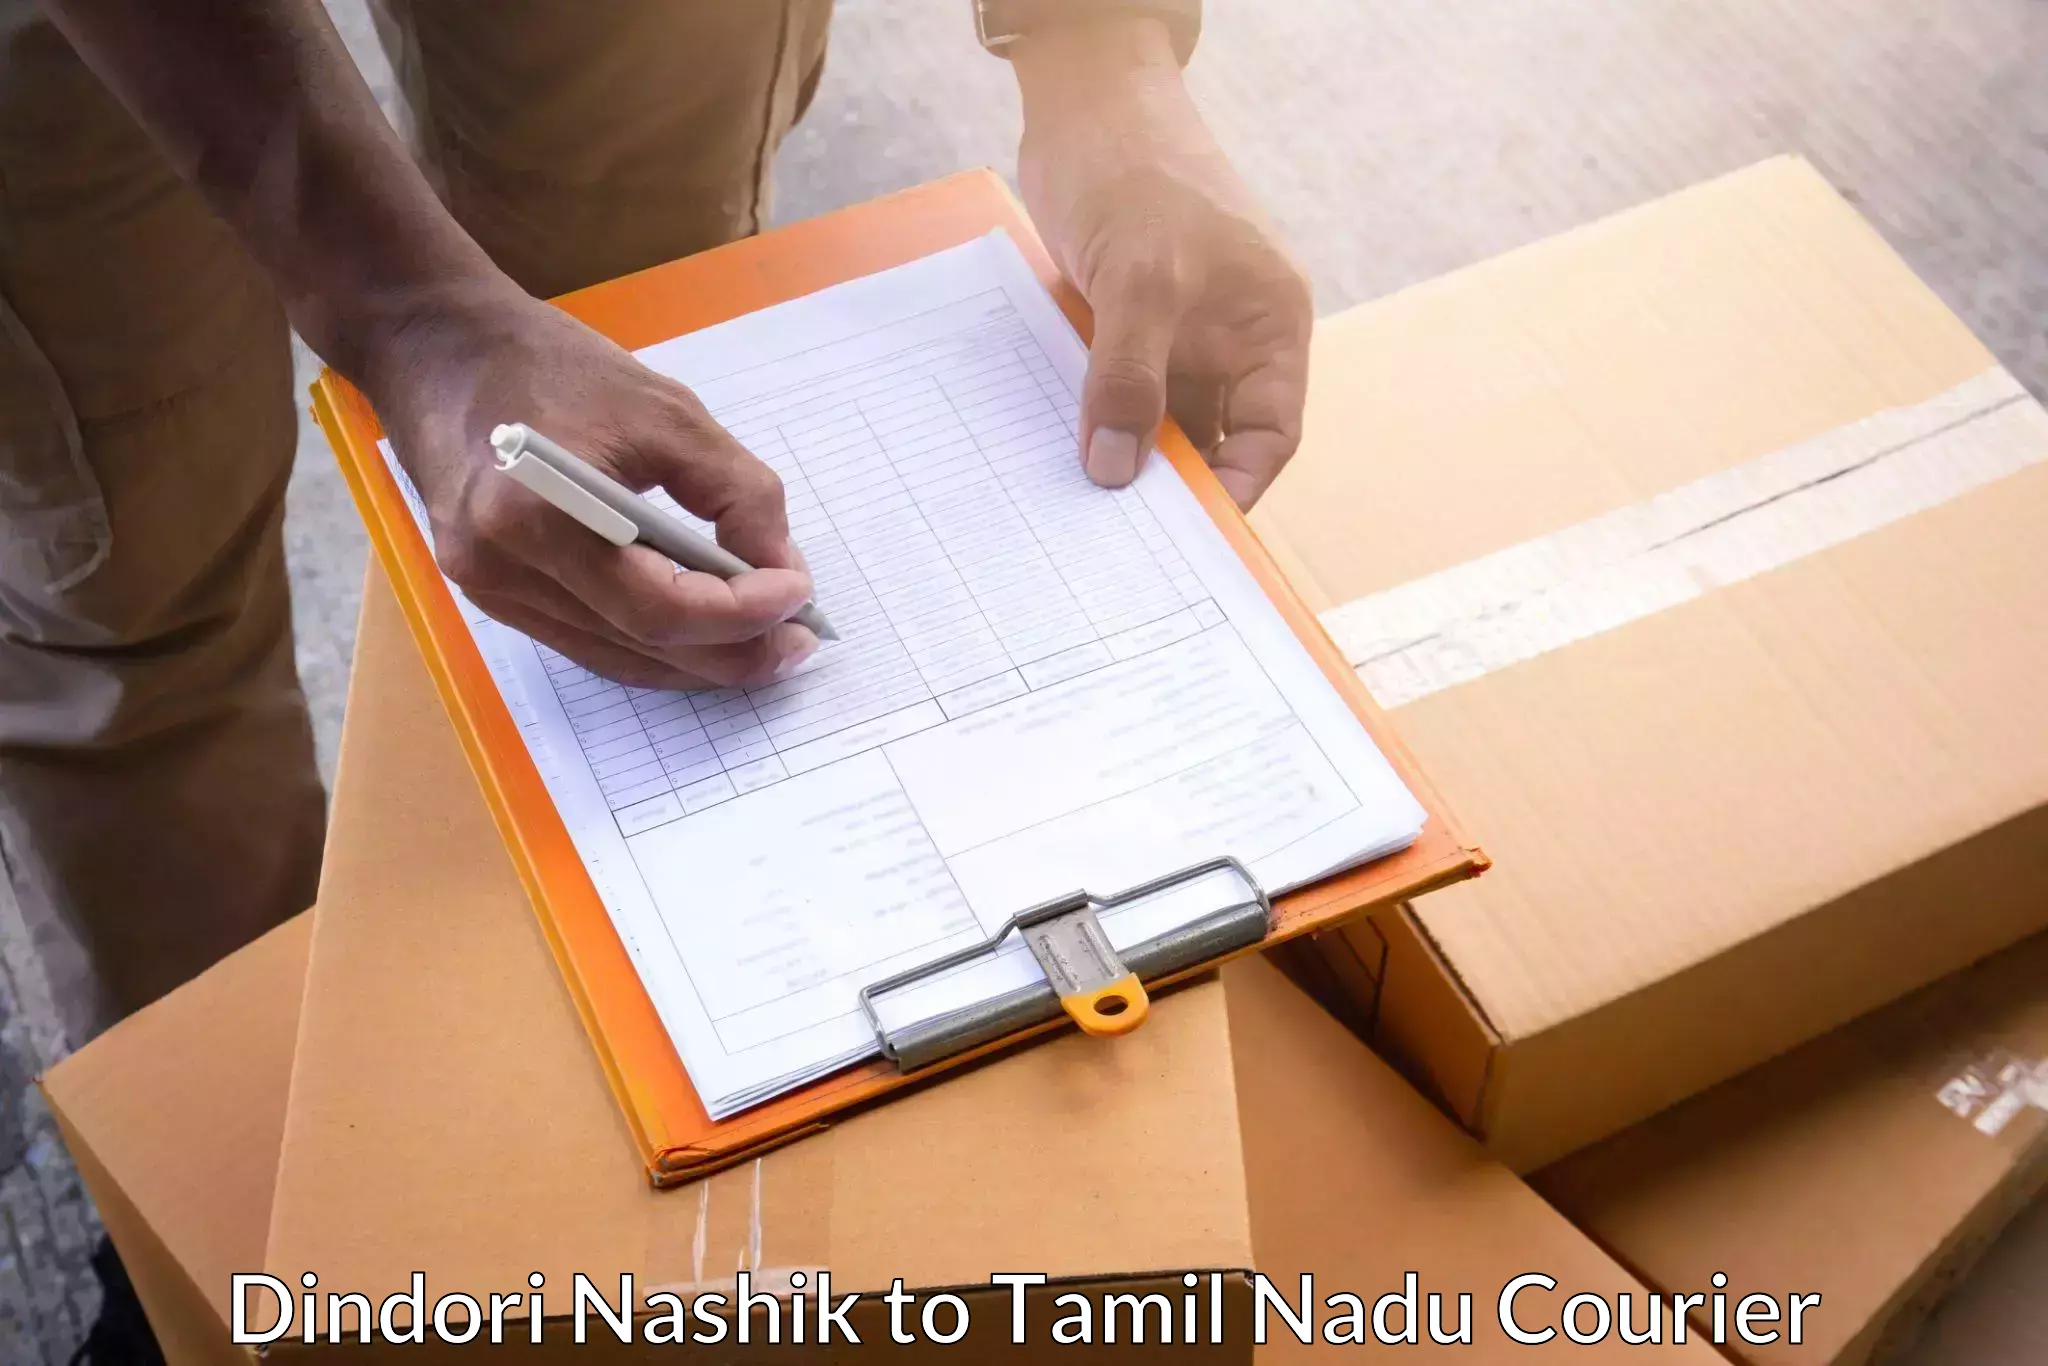 Scheduled delivery in Dindori Nashik to Karunya Institute of Technology and Sciences Coimbatore